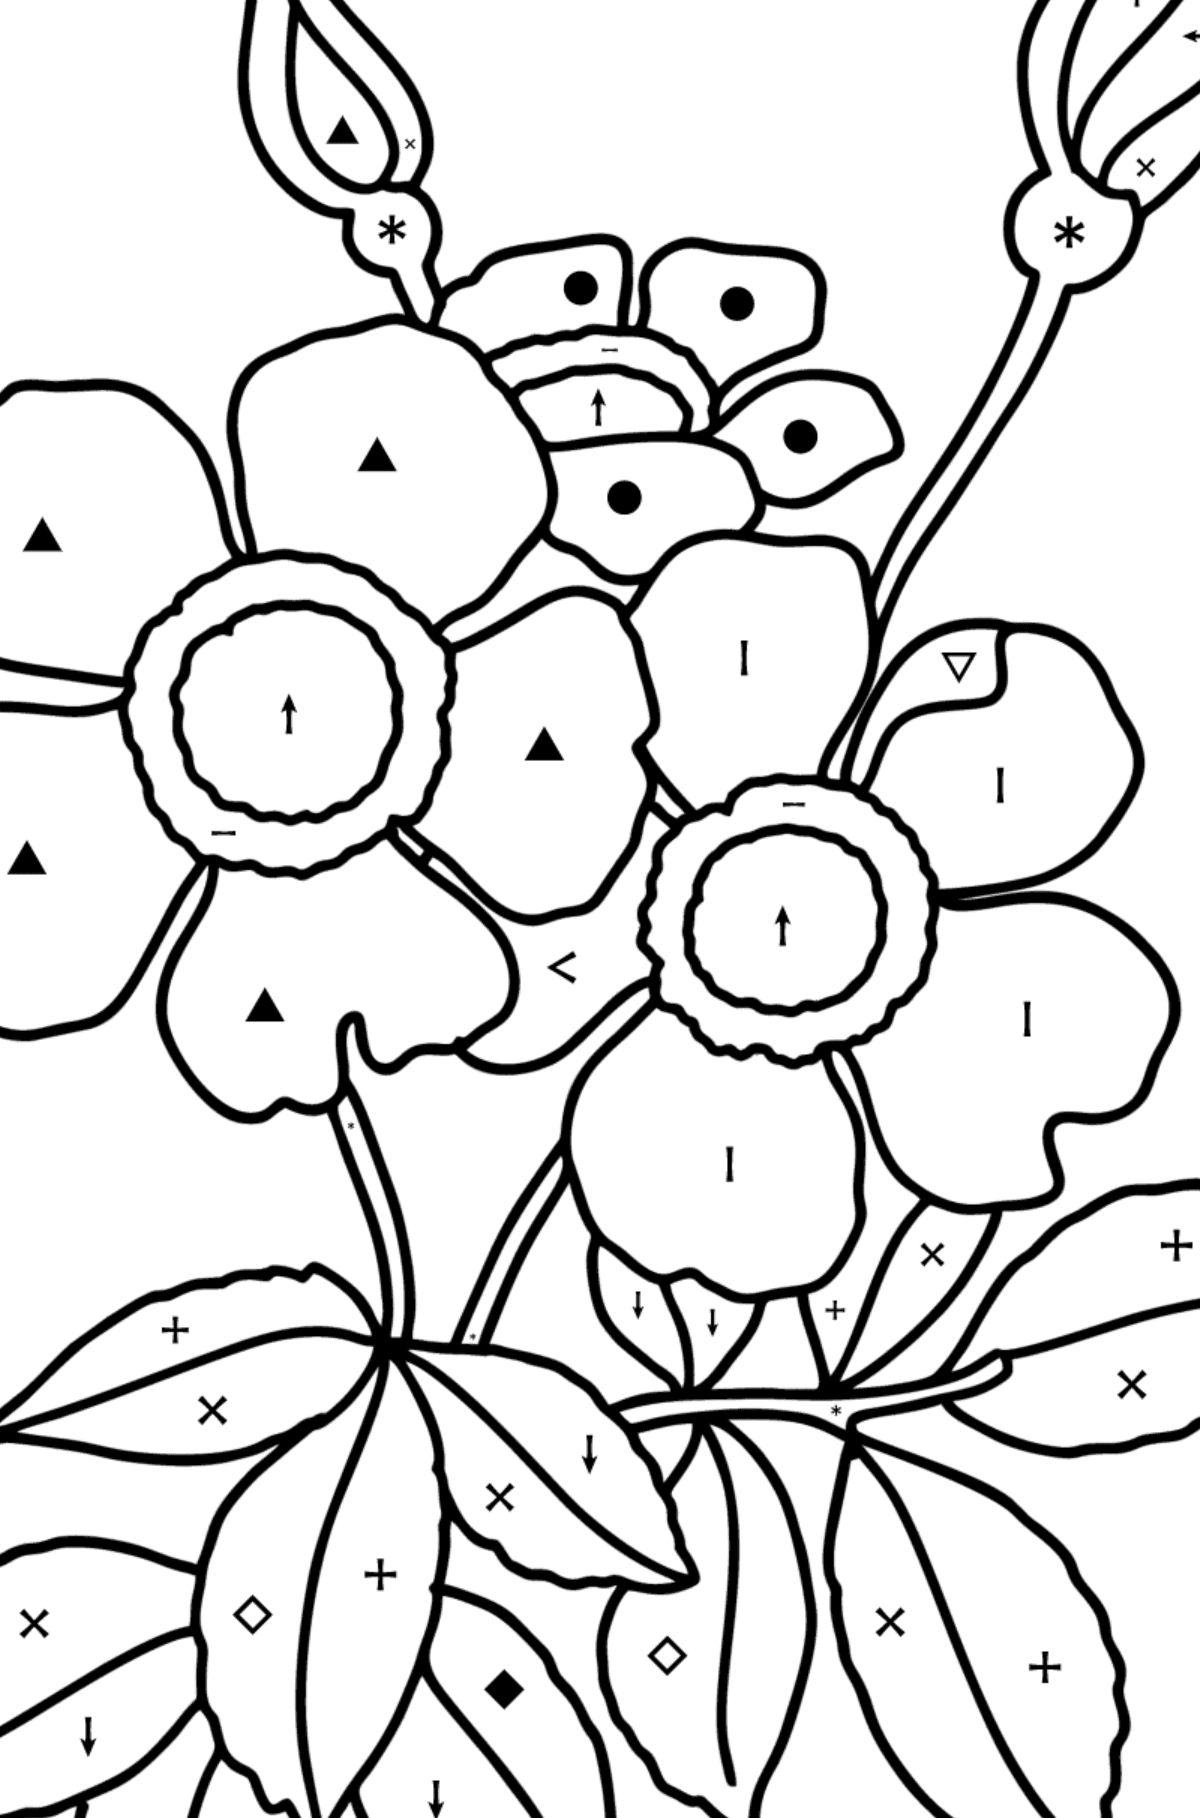 Spray rose coloring page - Coloring by Symbols for Kids